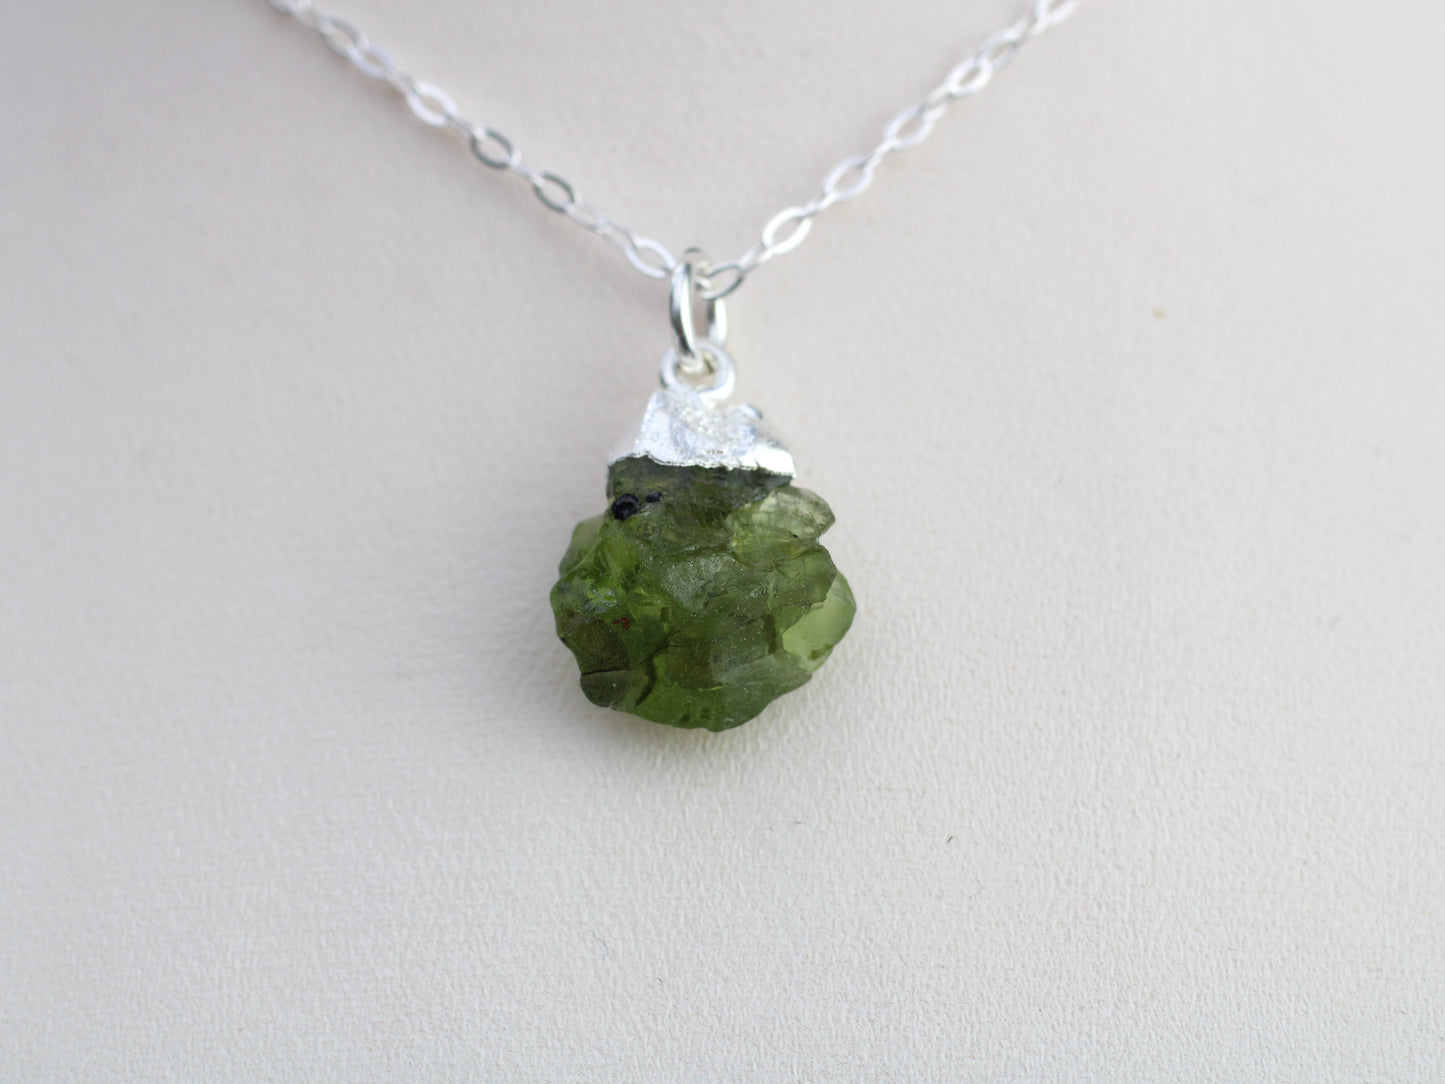 August birthstone necklace. Raw peridot necklace.